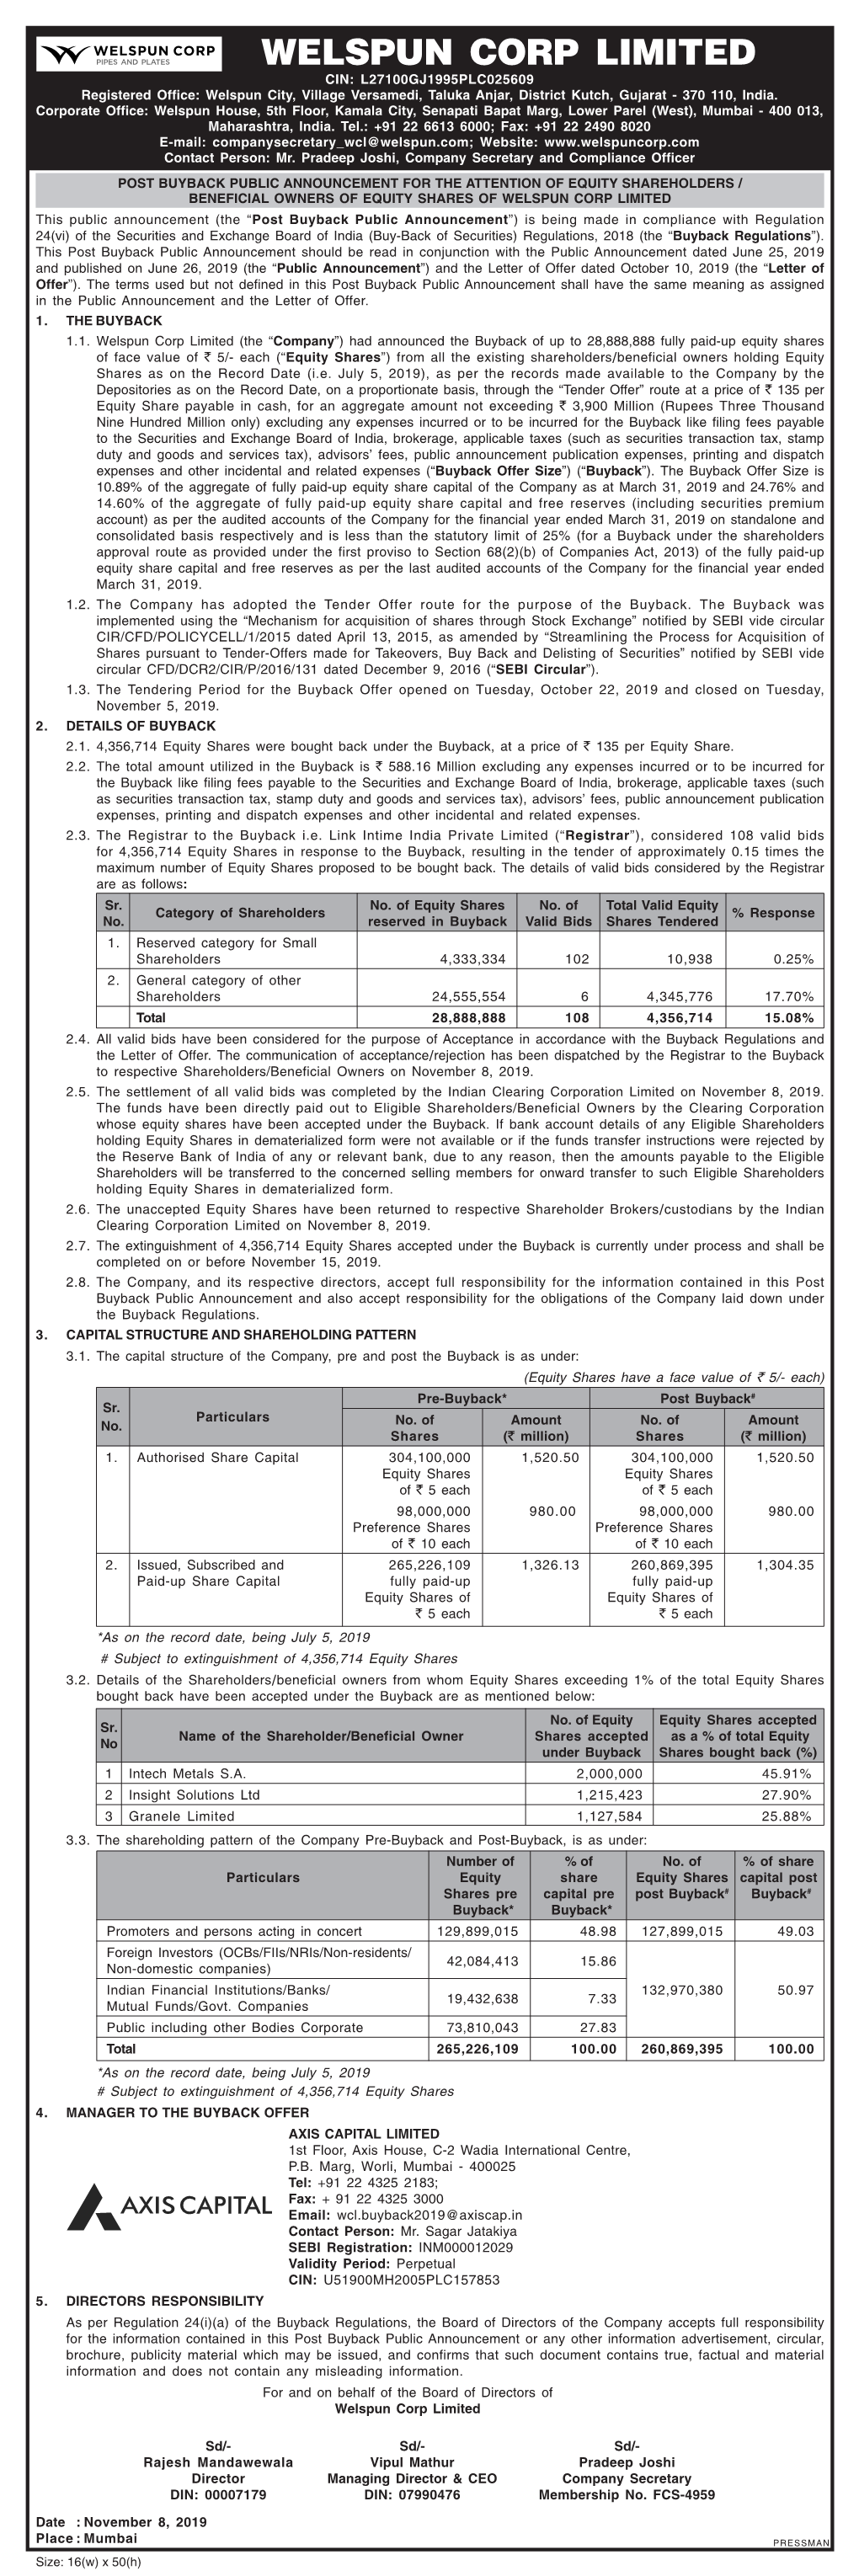 Welspun Corp Limited Post Buyback PA 8 November 2019.Pmd